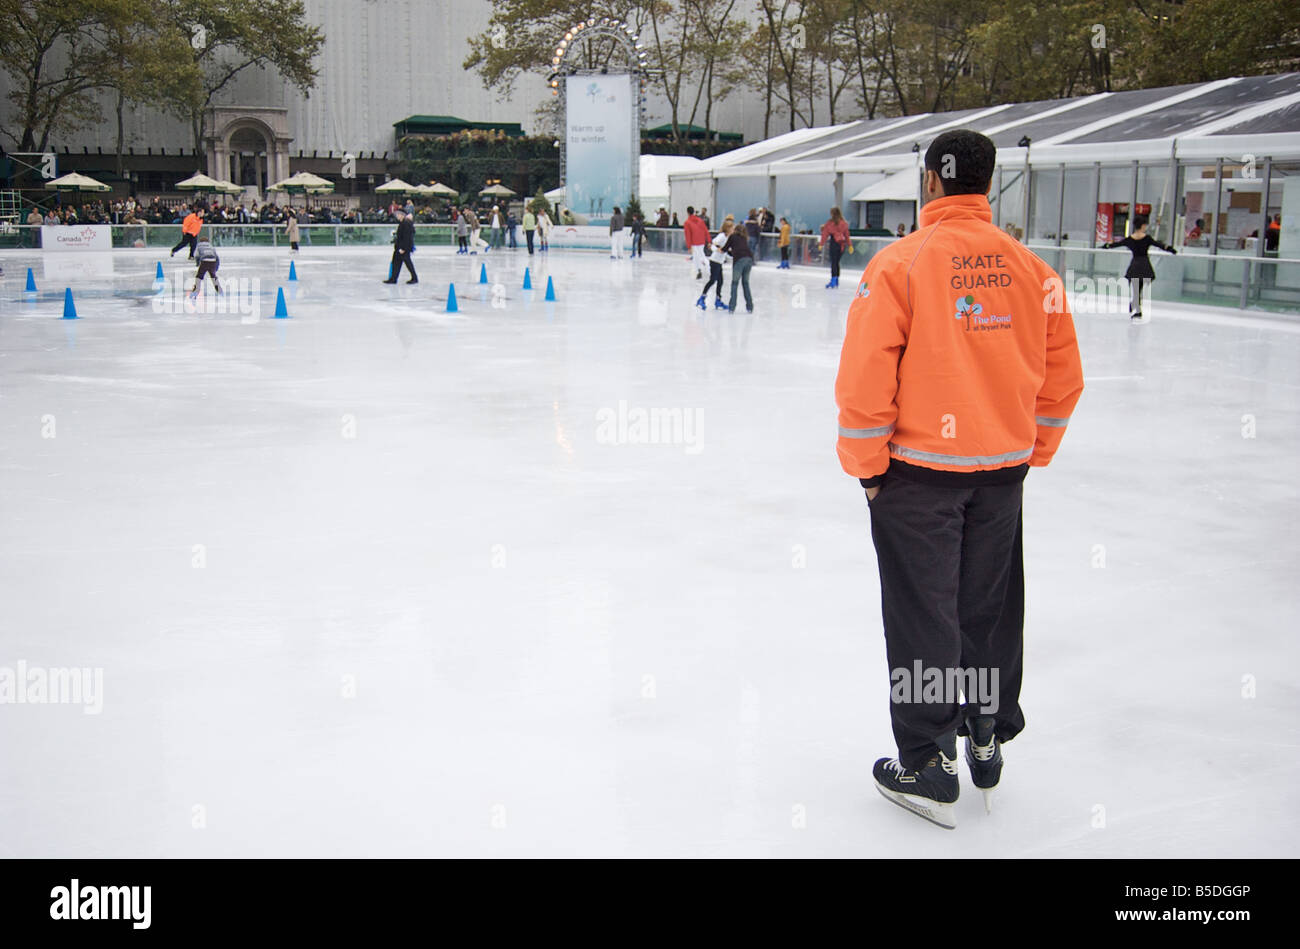 Bryant Park Skate Guard in New York City oversees ice skaters (For Editorial Use Only) Stock Photo